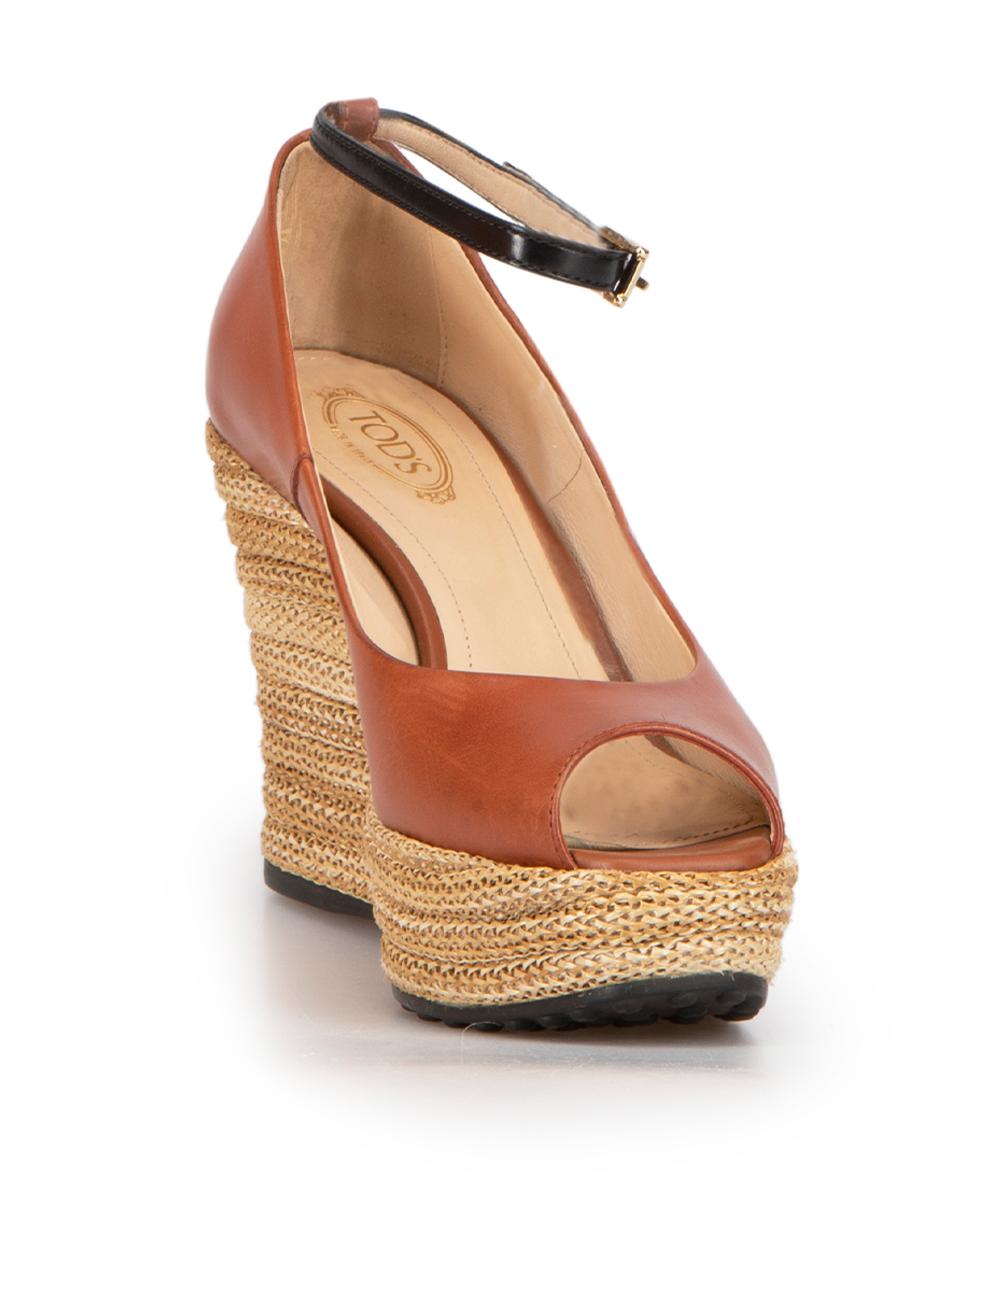 CONDITION is Good. Minor wear to shoes is evident. Light wear to both sides and heels of both shoes with scuff marks on this used Tod's designer resale item. These shoes come with original box.



Details


Brown

Leather

Espadrille wedge